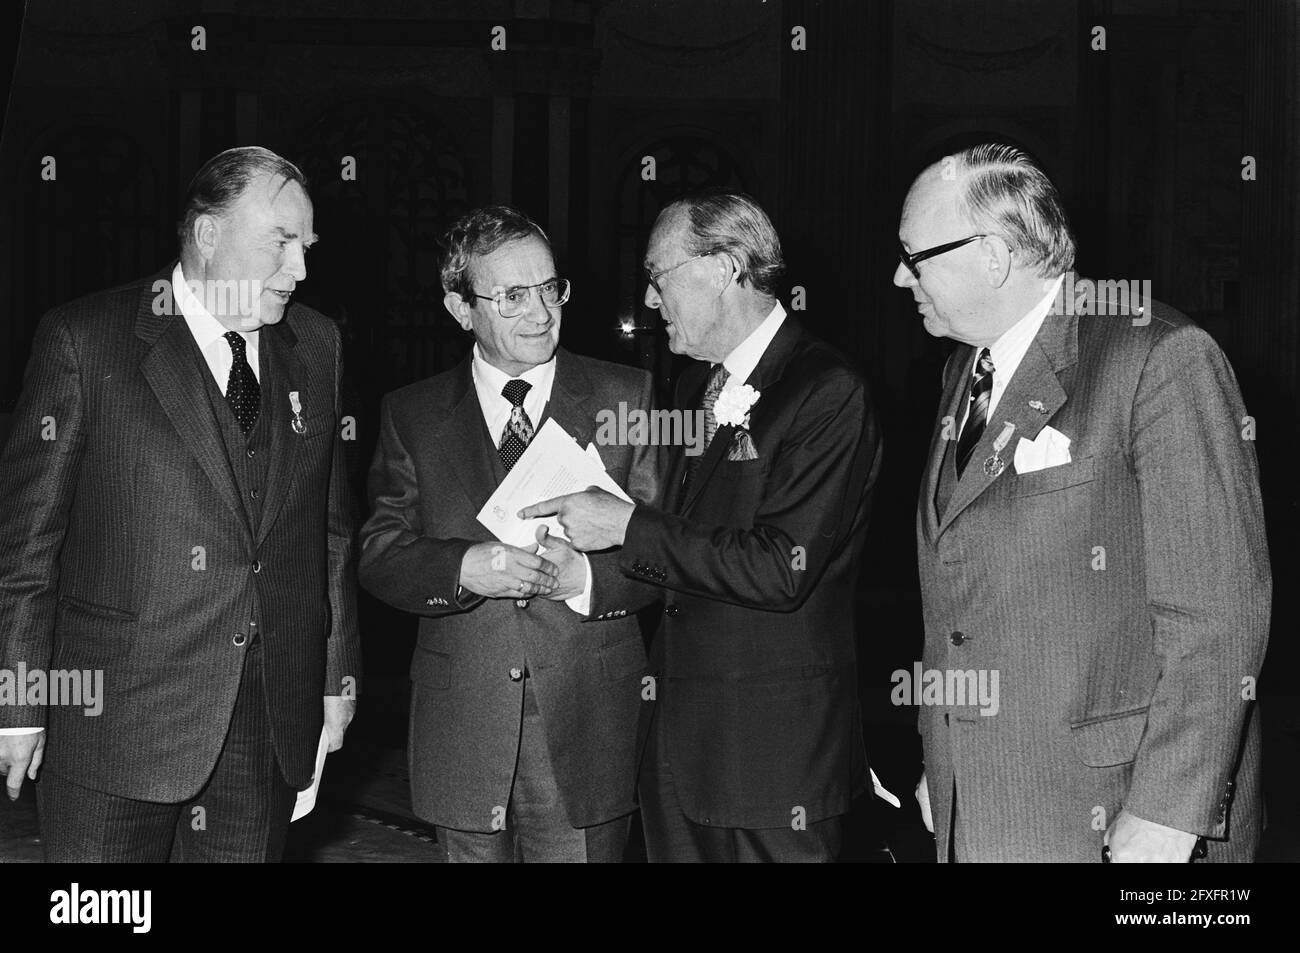 Presentation Silver Carnations by Prince Bernhard in Palace on the Dam, Prince Bernhard and laureates and others, June 27, 1980, Presentations, honors, princes, The Netherlands, 20th century press agency photo, news to remember, documentary, historic photography 1945-1990, visual stories, human history of the Twentieth Century, capturing moments in time Stock Photo